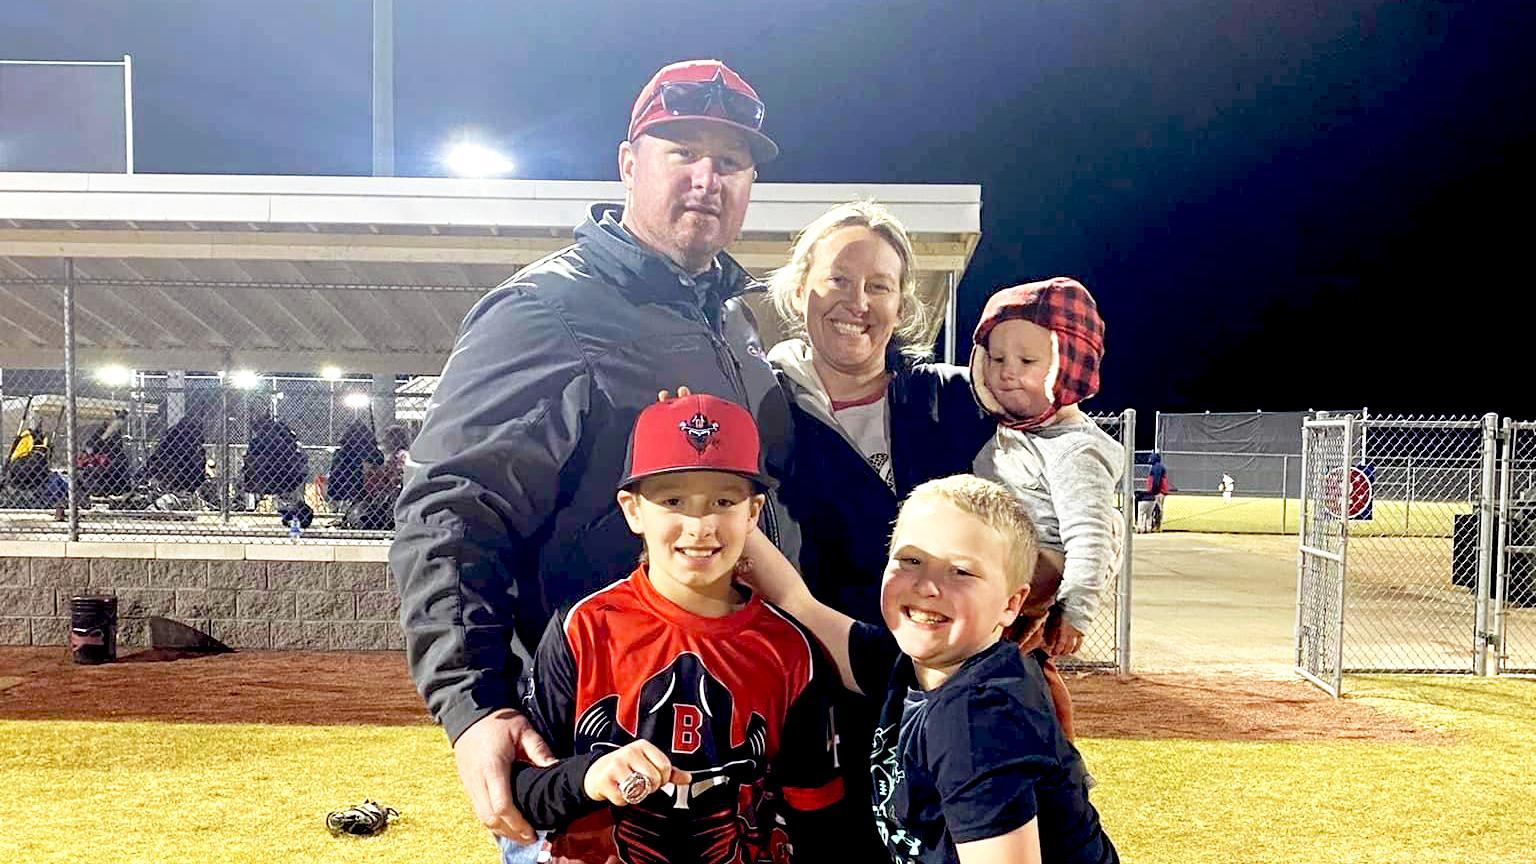 Jeremy Stroud pictured with his children and wife